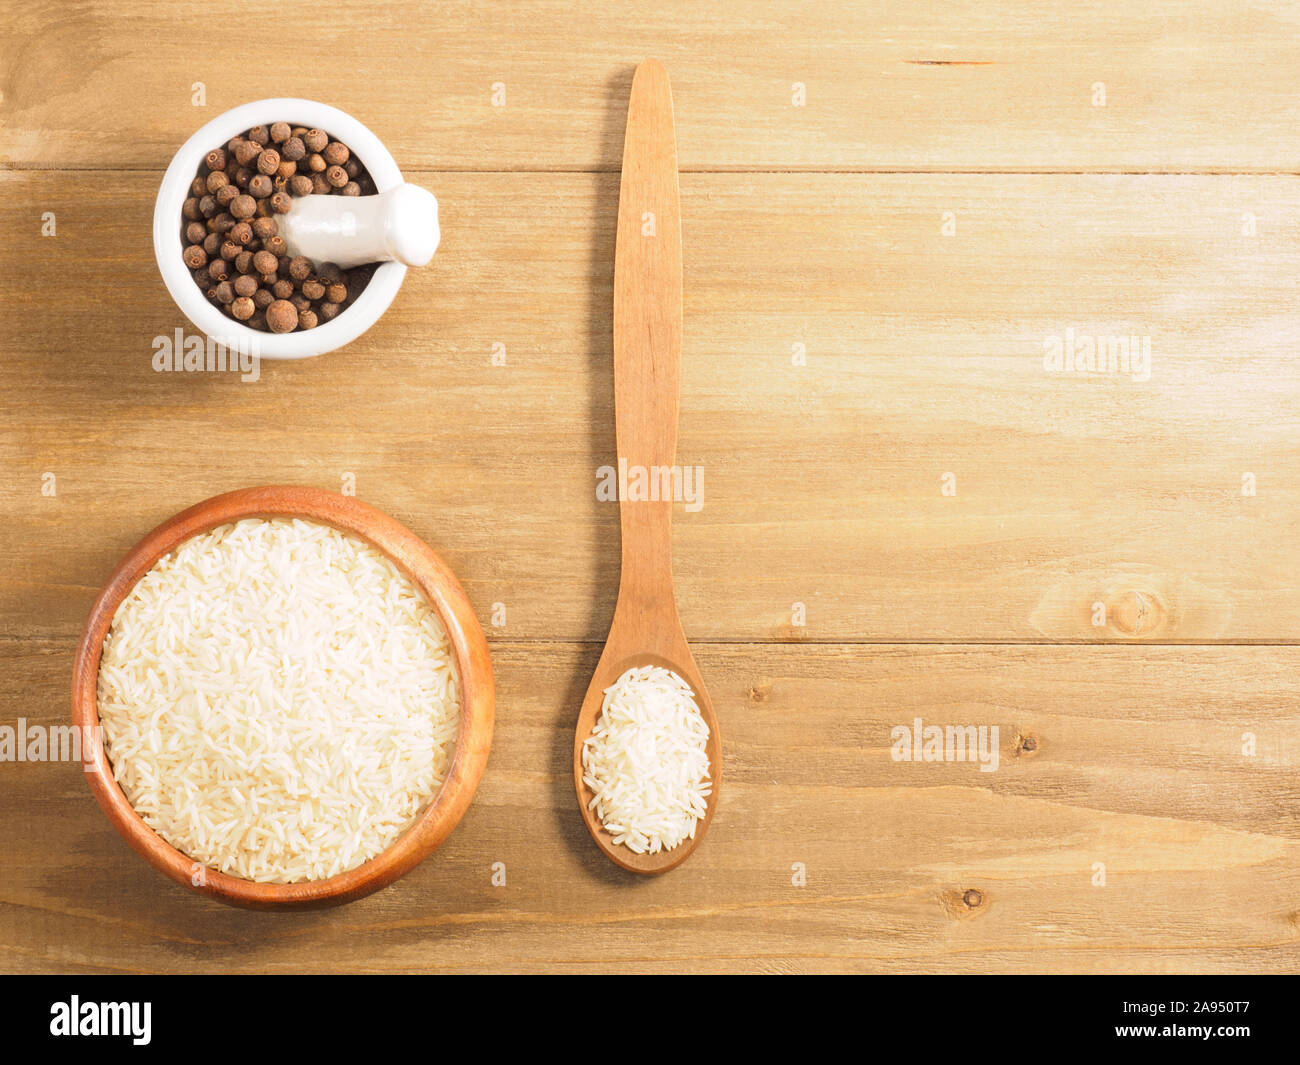 Rice and allspice on brown wooden background. Indian cuisine, ayurveda, naturopathy, modern apothecary concept Stock Photo